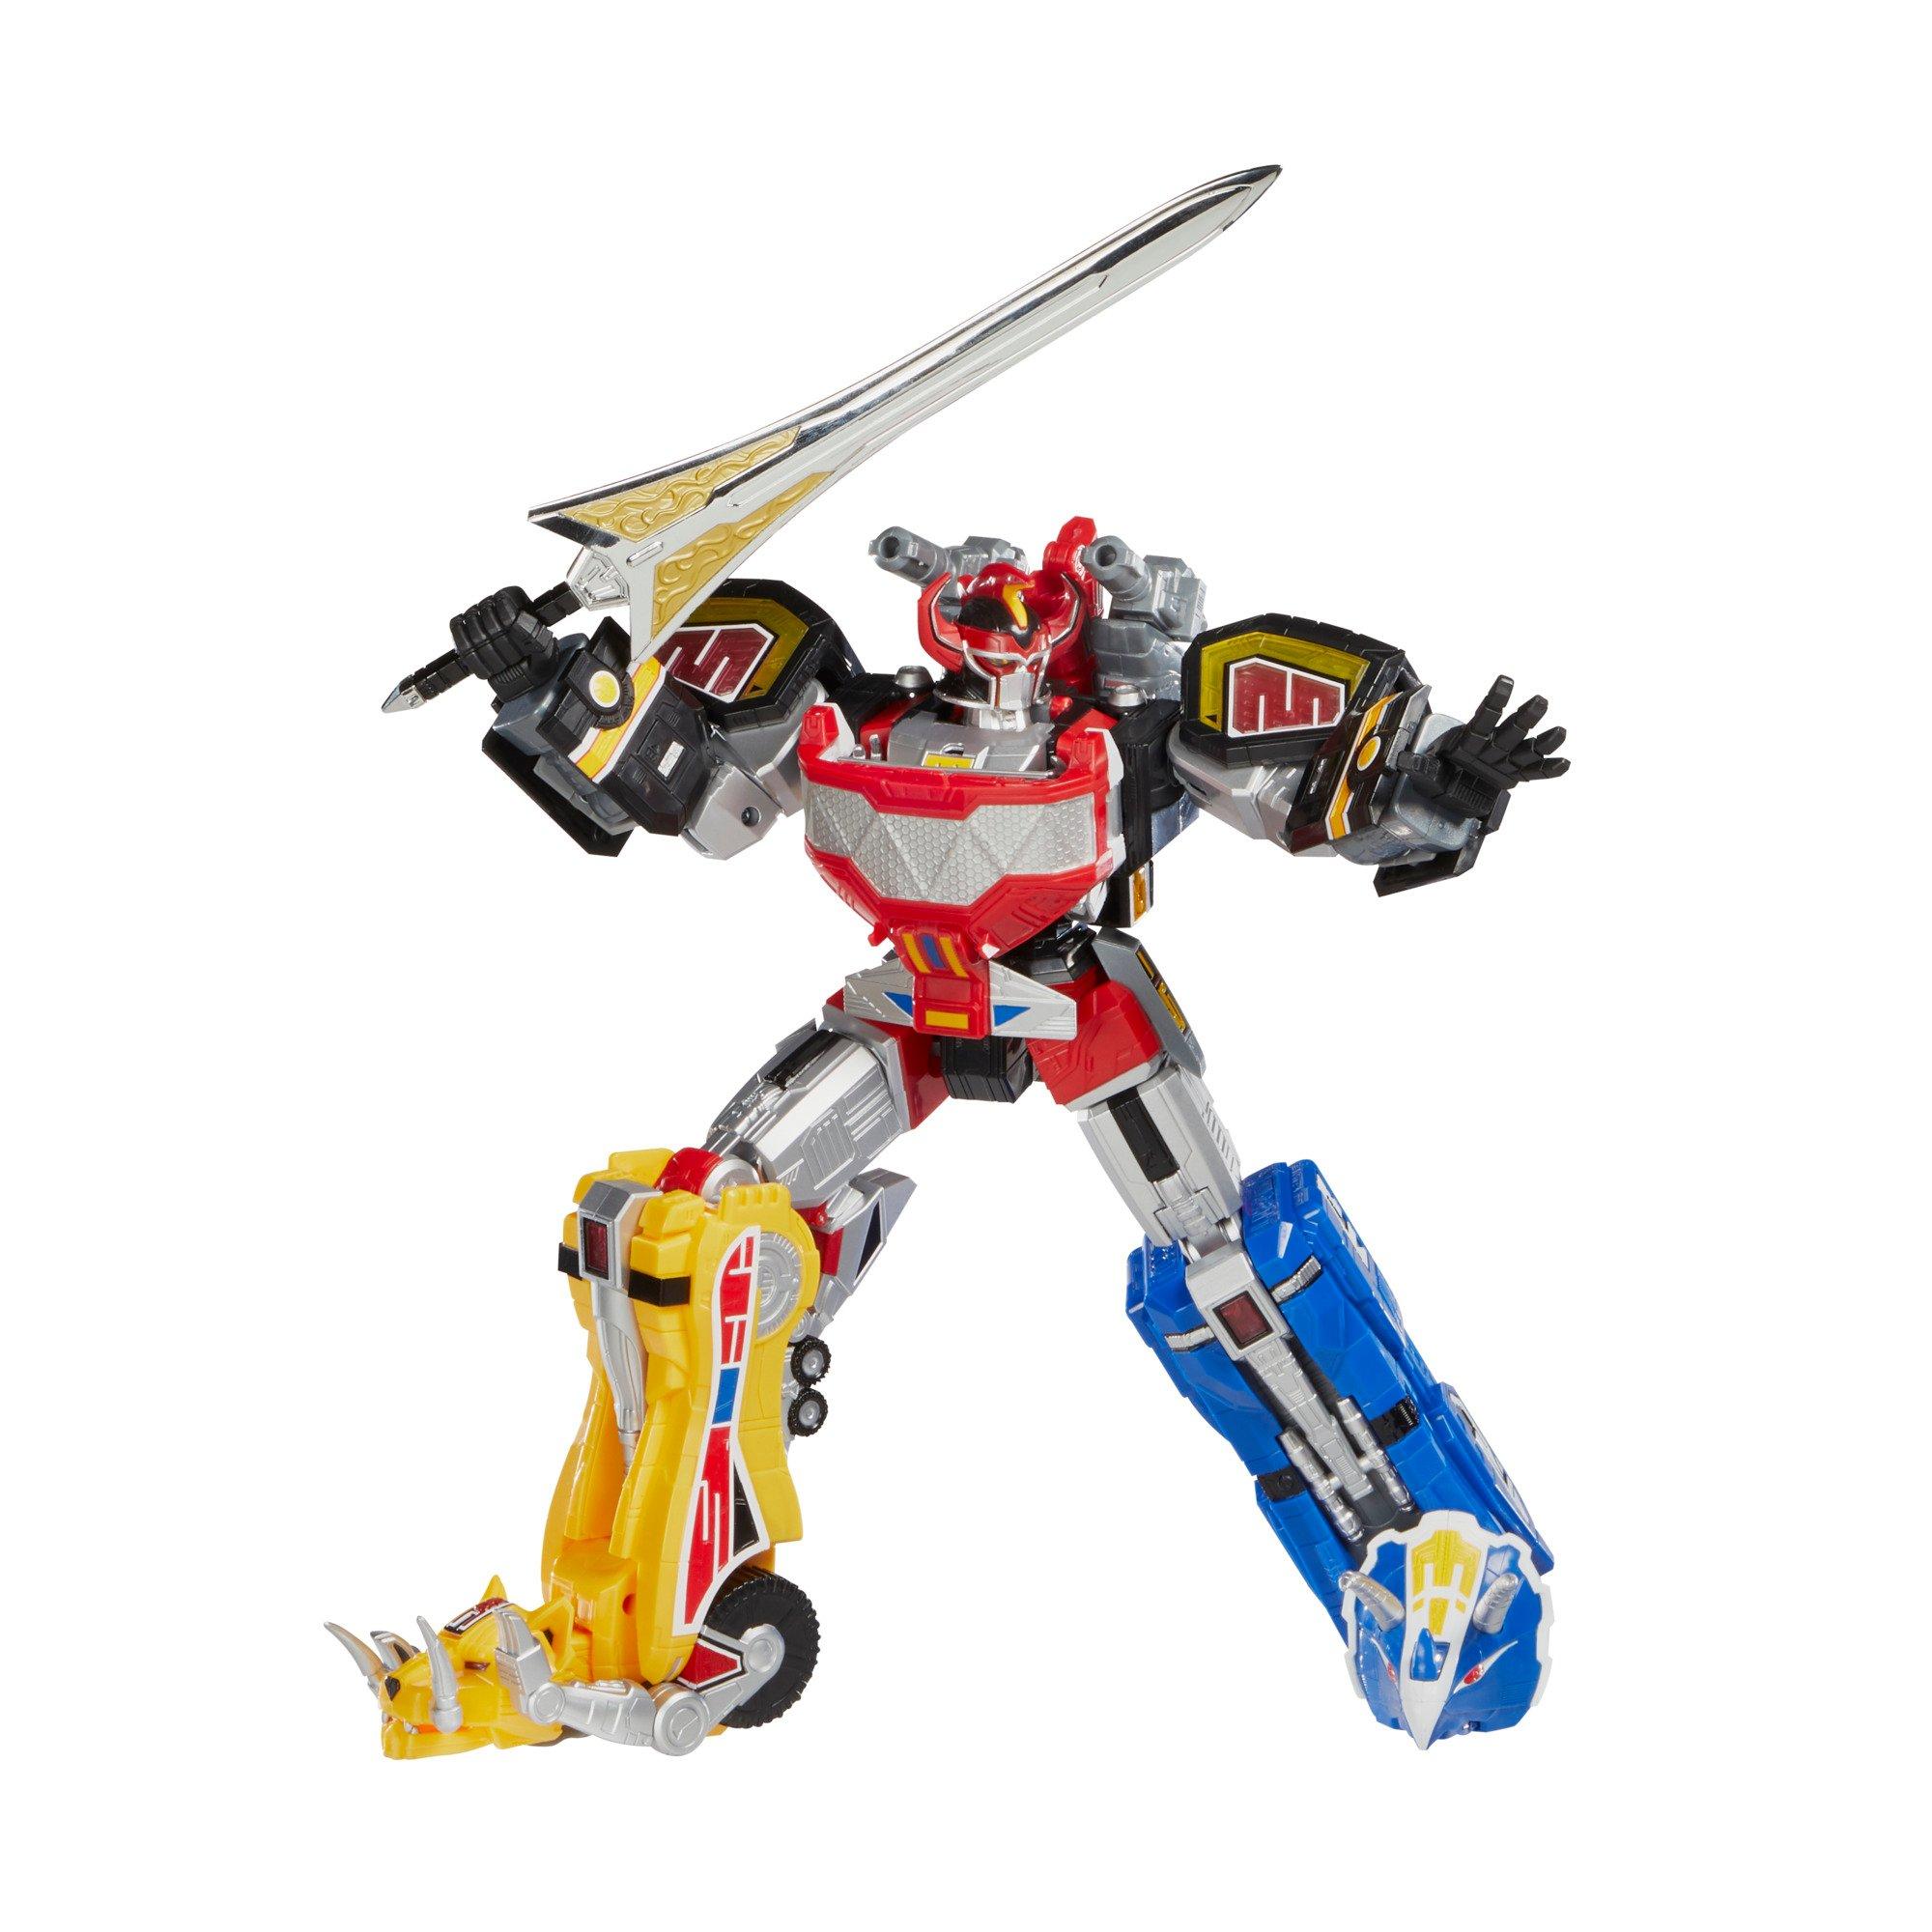 list item 1 of 16 Hasbro Mighty Morphin Power Rangers Zord Ascension Project Dino Megazord Action Figure